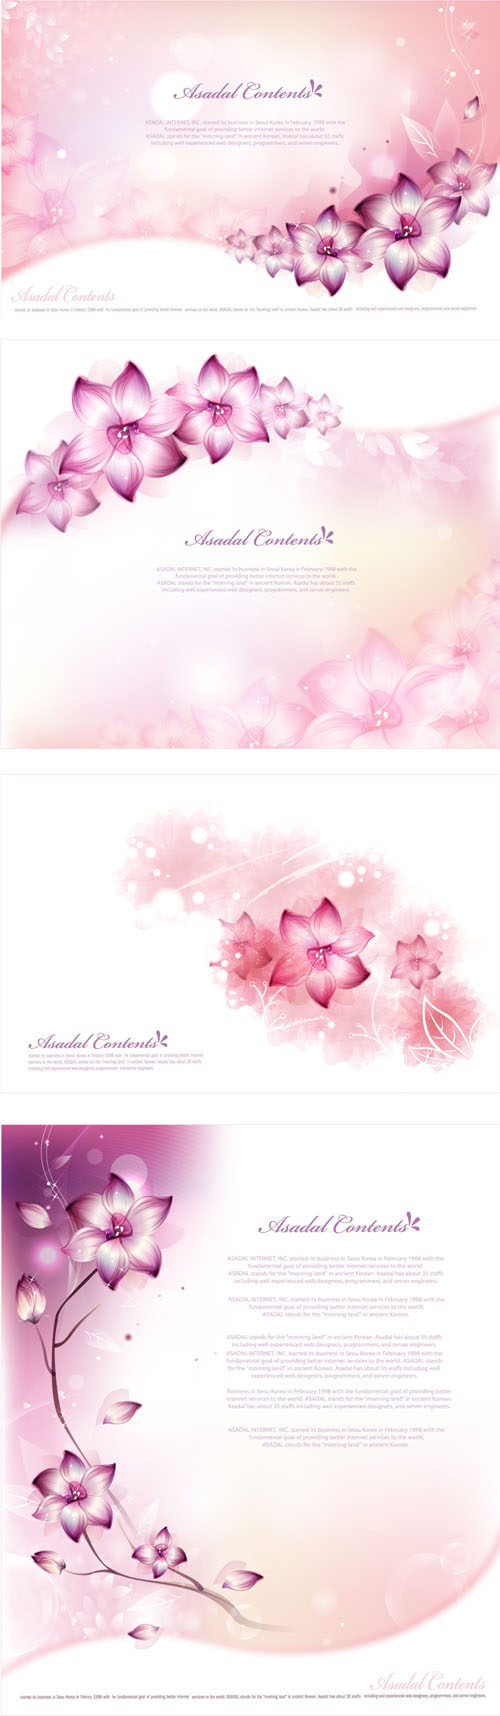 Brilliant flowers background material vector 04